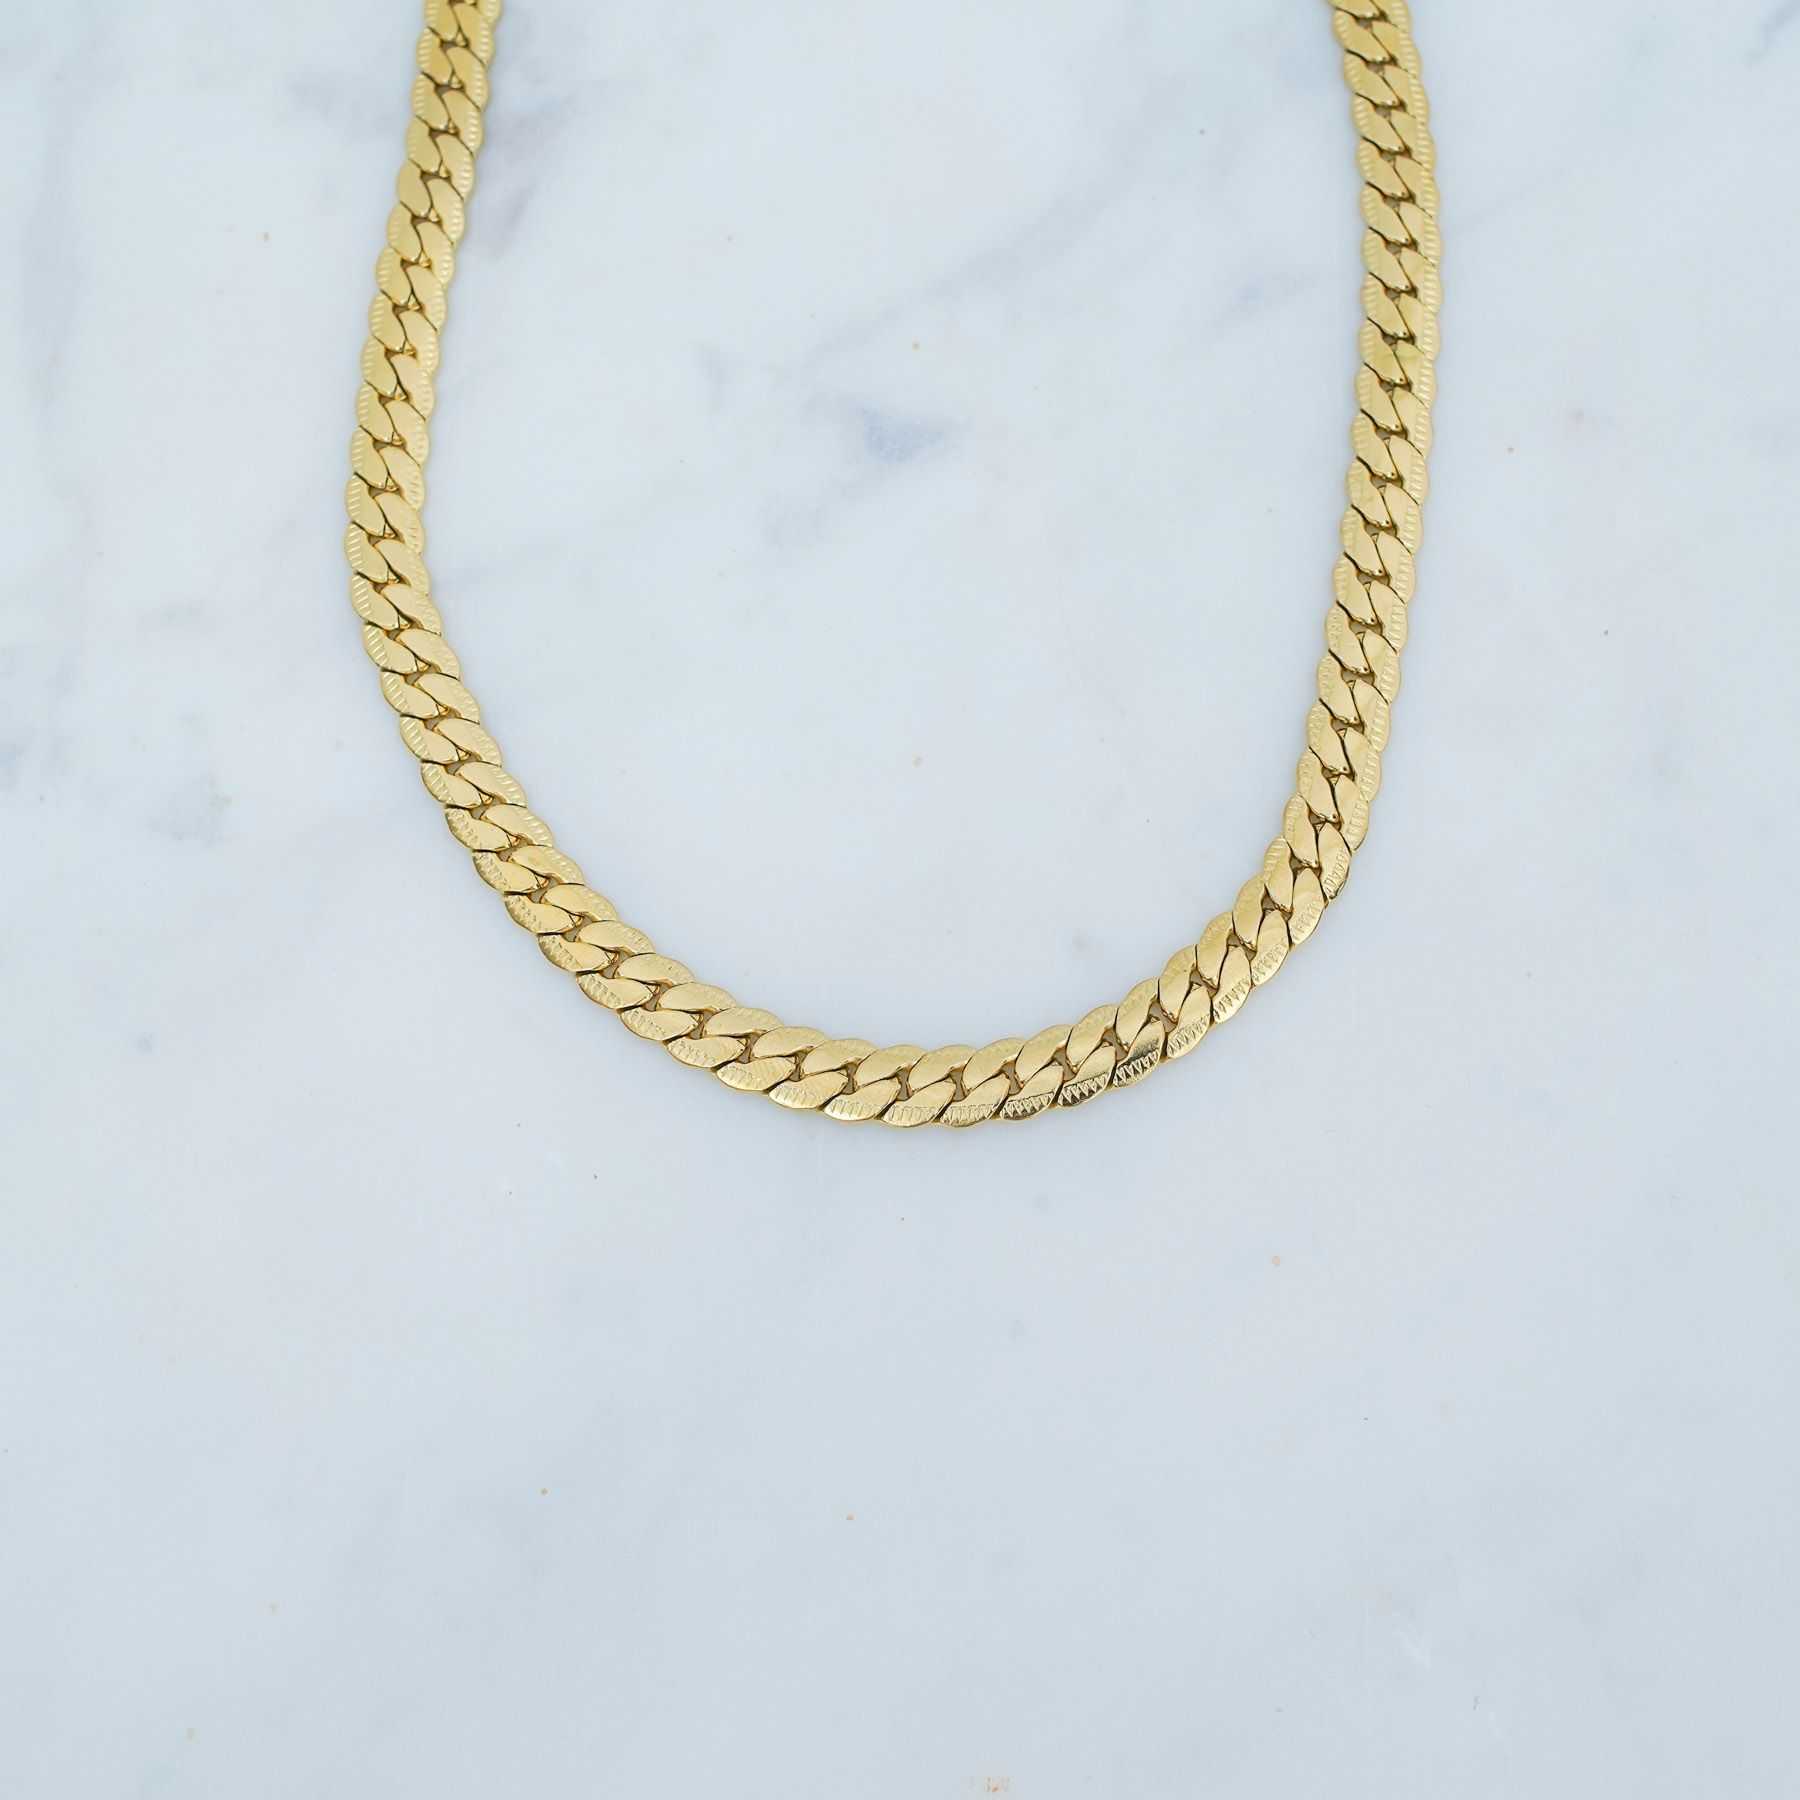 ETERNITY CHAIN NECKLACE - GOLD